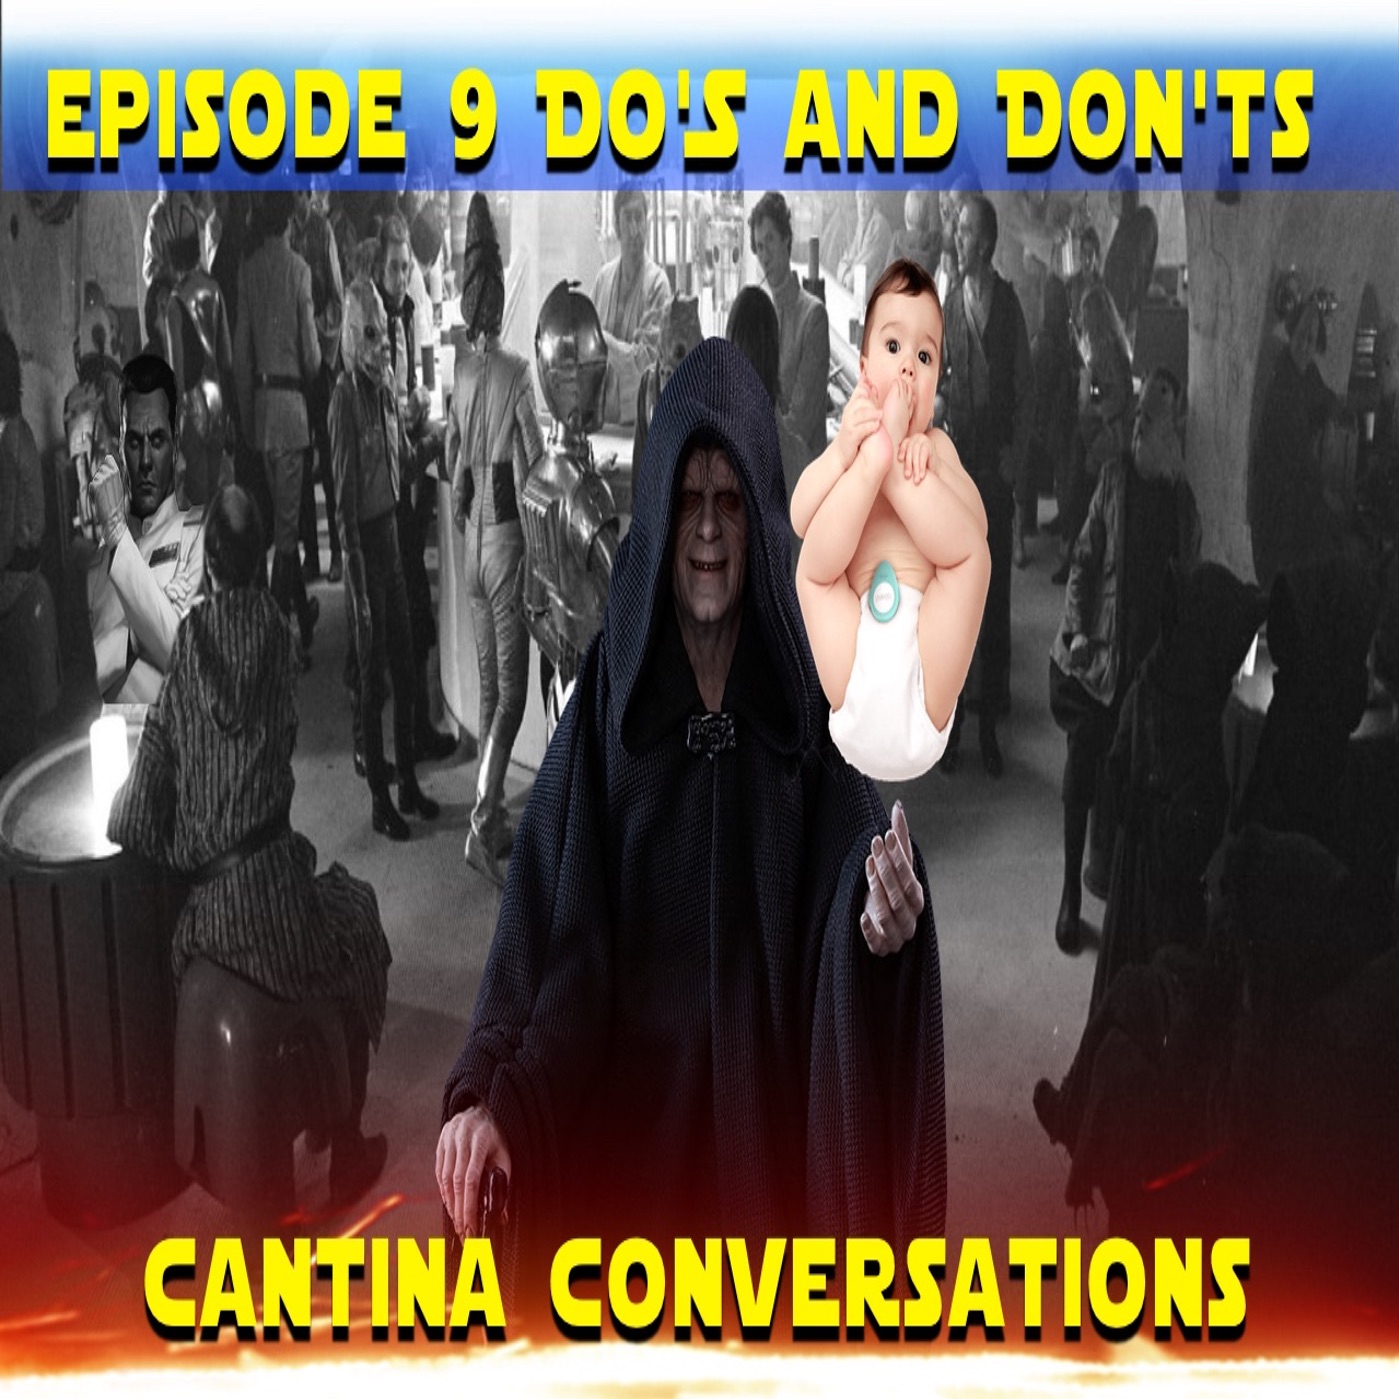 Star Wars Episode 9/What We Want & Don't Want : Cantina Conversations